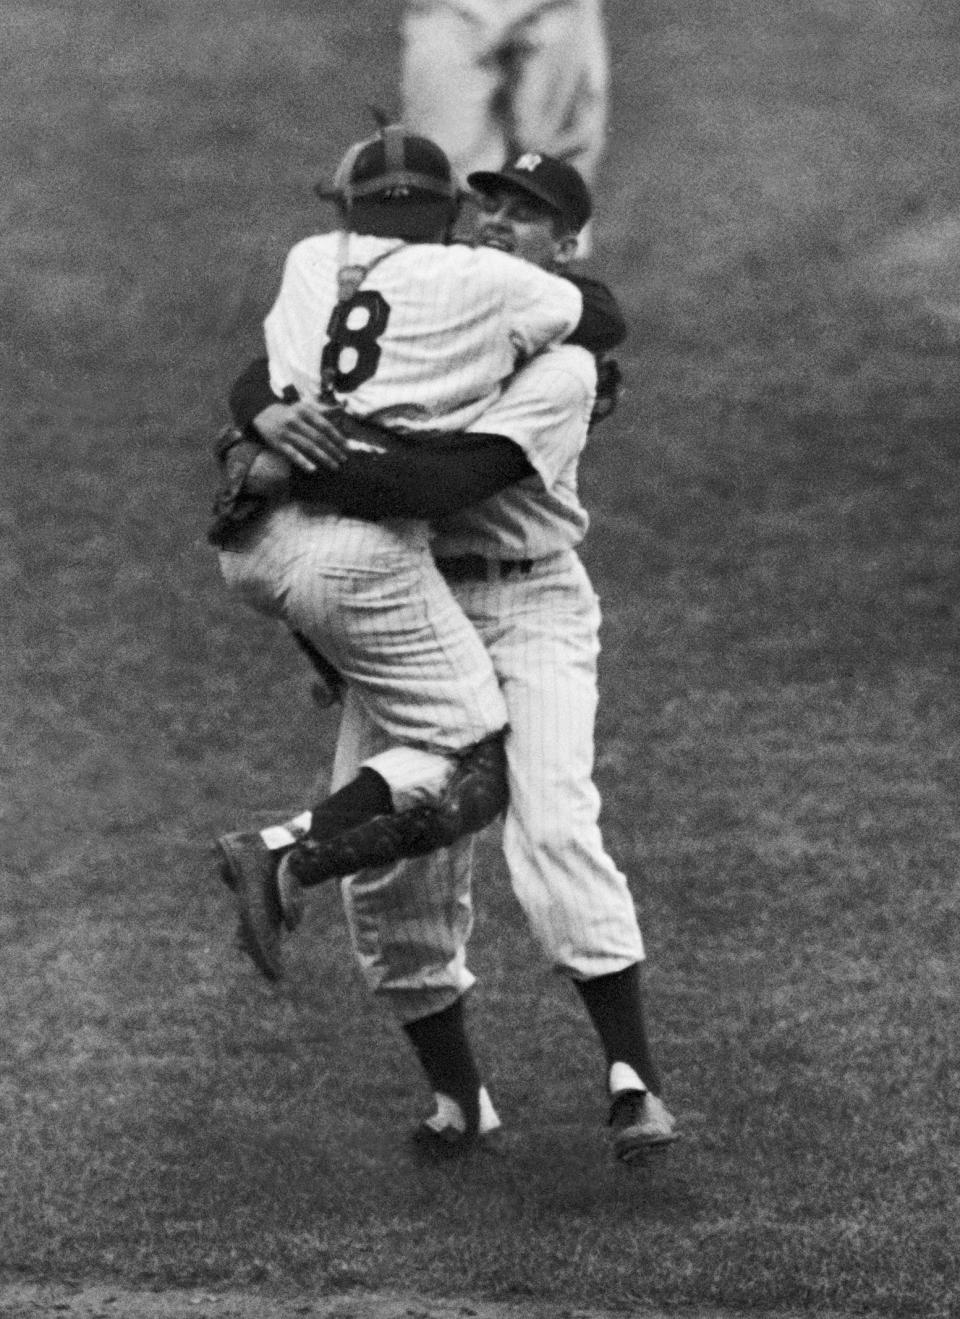 Yankees catcher Yogi Berra leaps into the arms of pitcher Don Larsen after Larsen tossed a perfect game during Game 5 of the 1956 World Series.